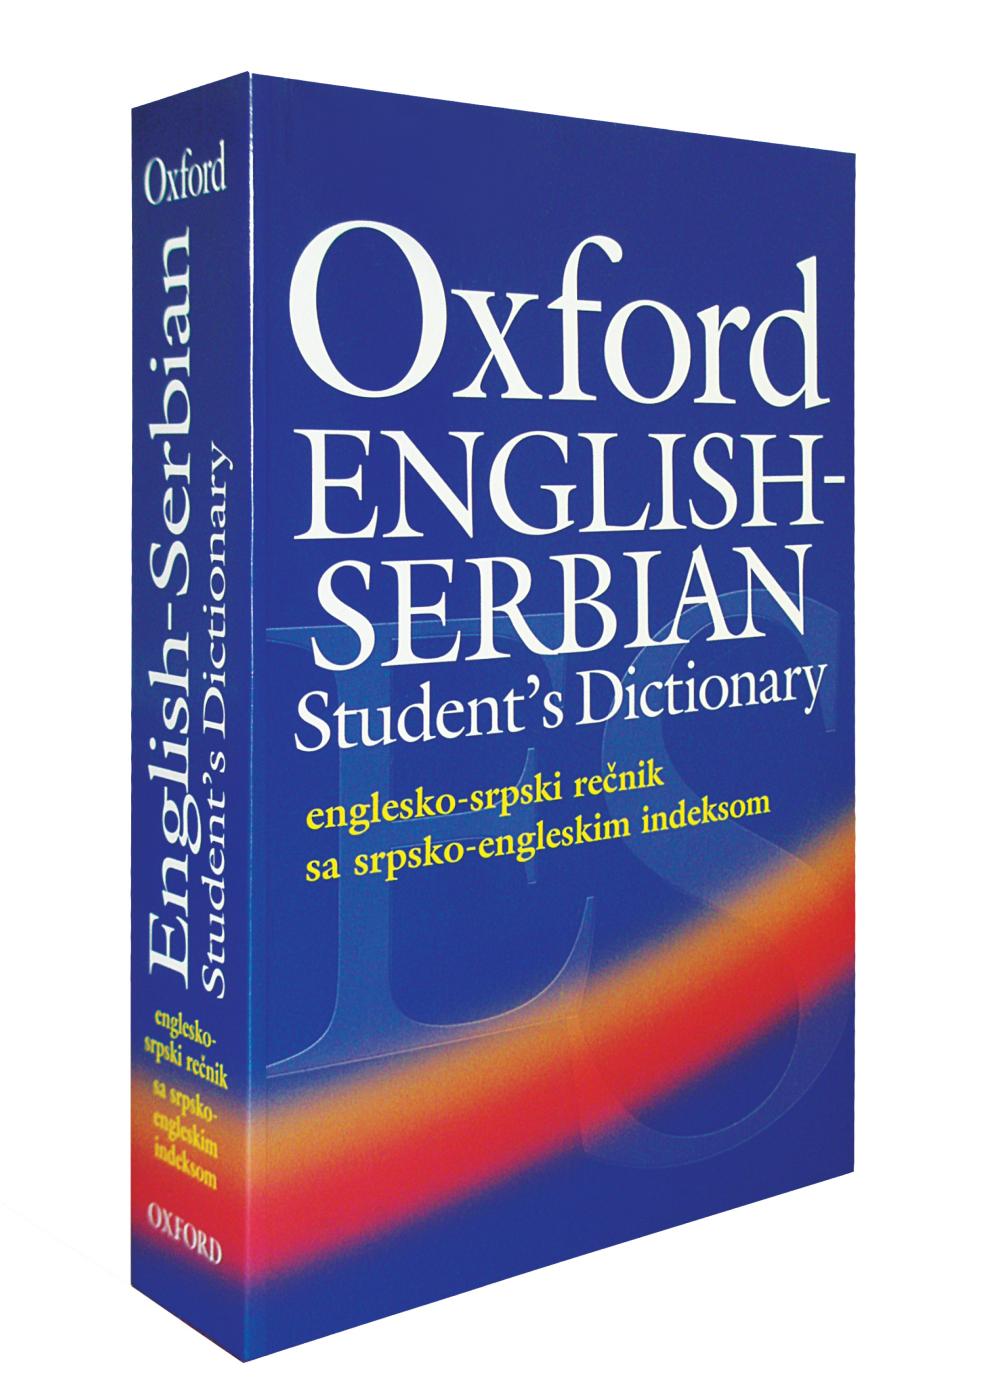 Oxford ENGLISH - SERBIAN Student’s Dictionary